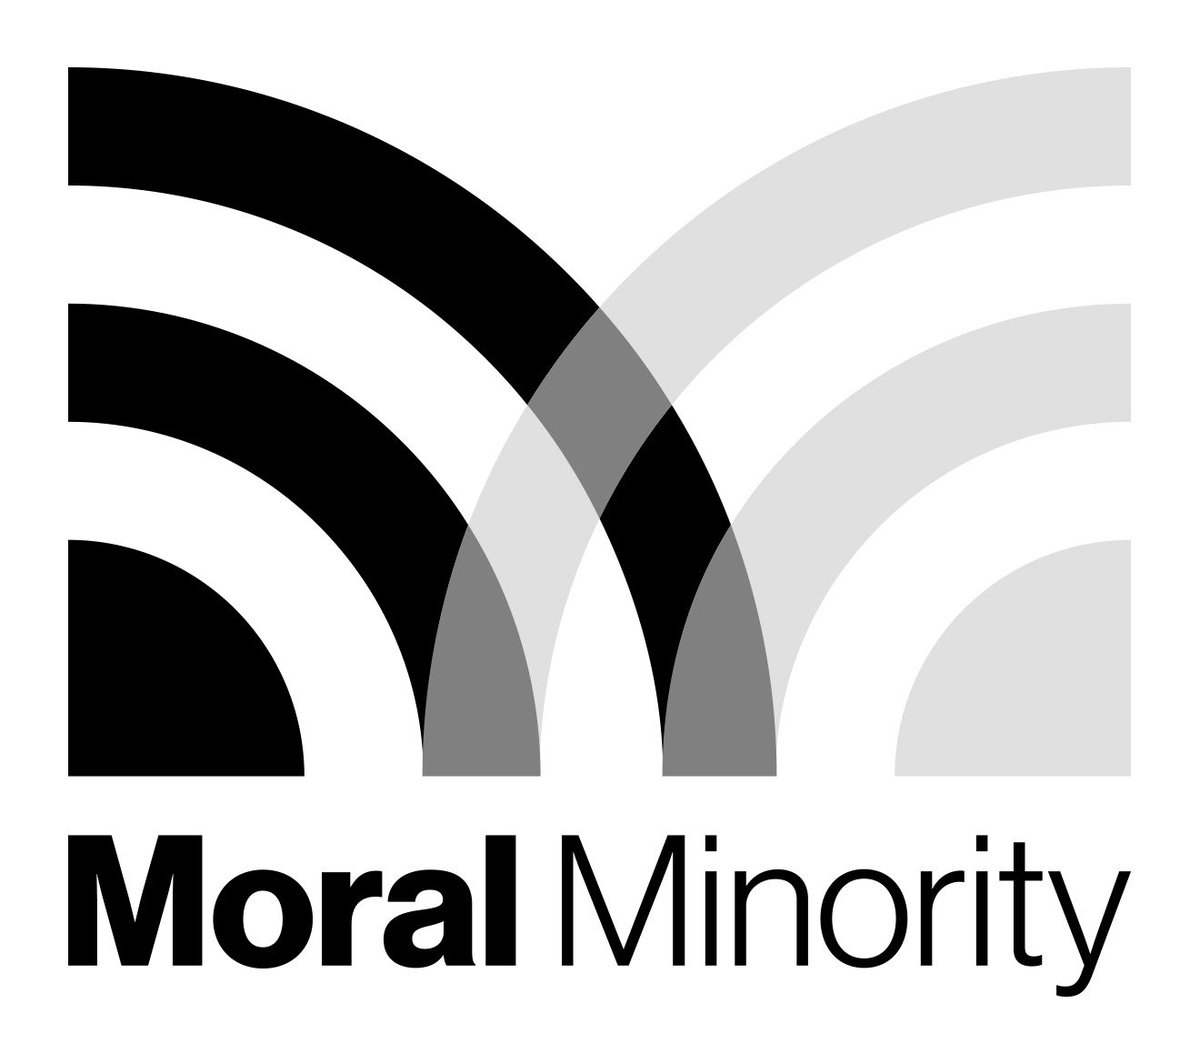 With Part 2 of Moral Minority’s series on Dialectic of Enlightenment coming this weekend, now is the perfect time to support @DevinGoure and I by becoming a paying subscriber on Patreon. For $5 per month, you can be part of the vanguard supporting philosophy outside the academy!